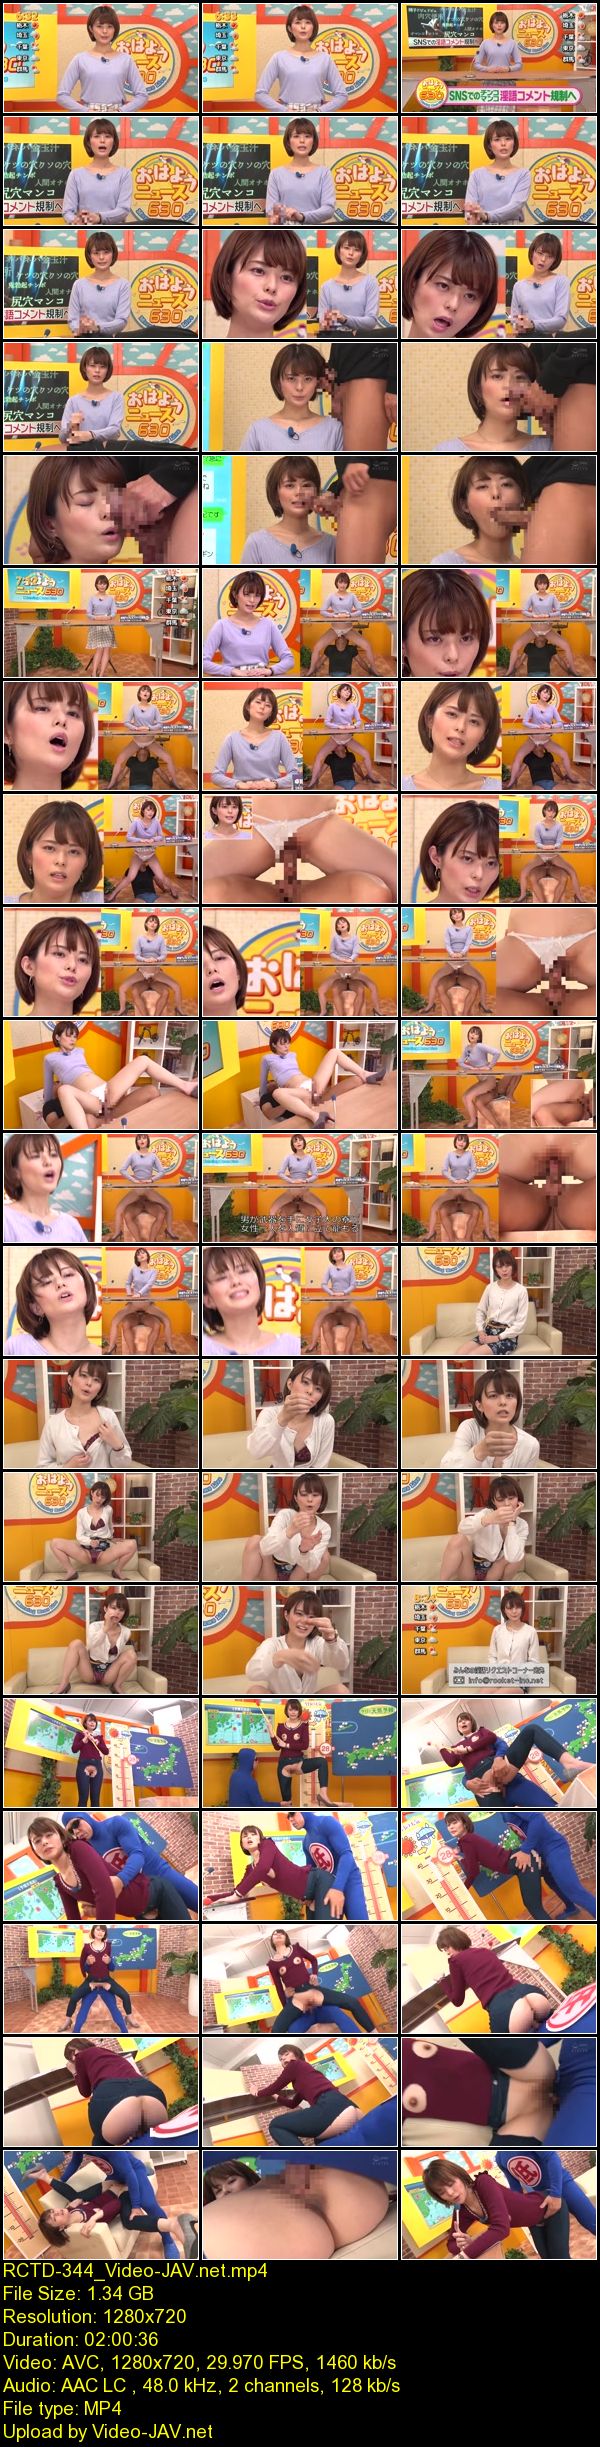 Download Japanese Adult Video Runa Tsukino [RCTD 344] 淫語女子アナ 22 月乃ルナSP 神戸たろう フェチ ロケット 痴女 2020 08 13